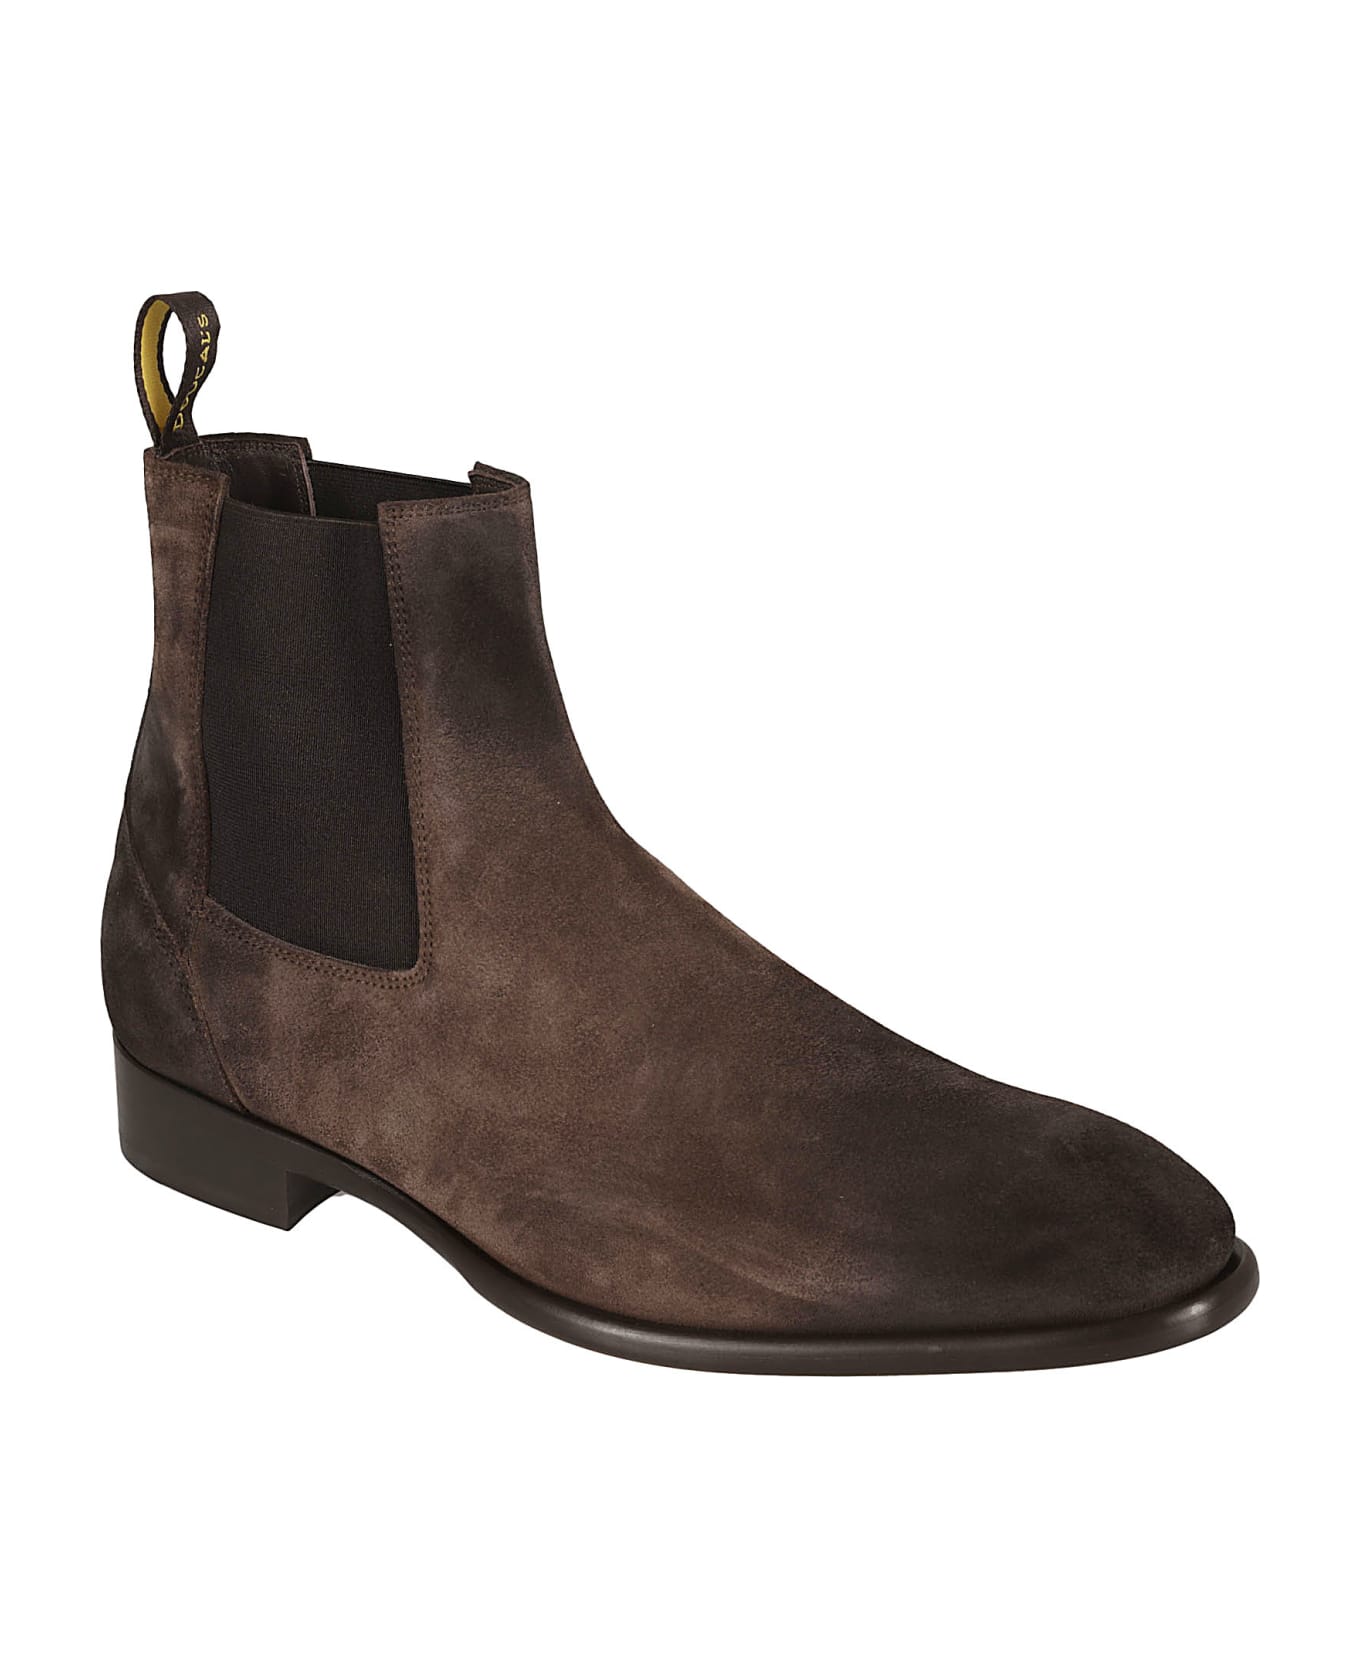 Doucal's Point Chelsea Boots - Brown ブーツ